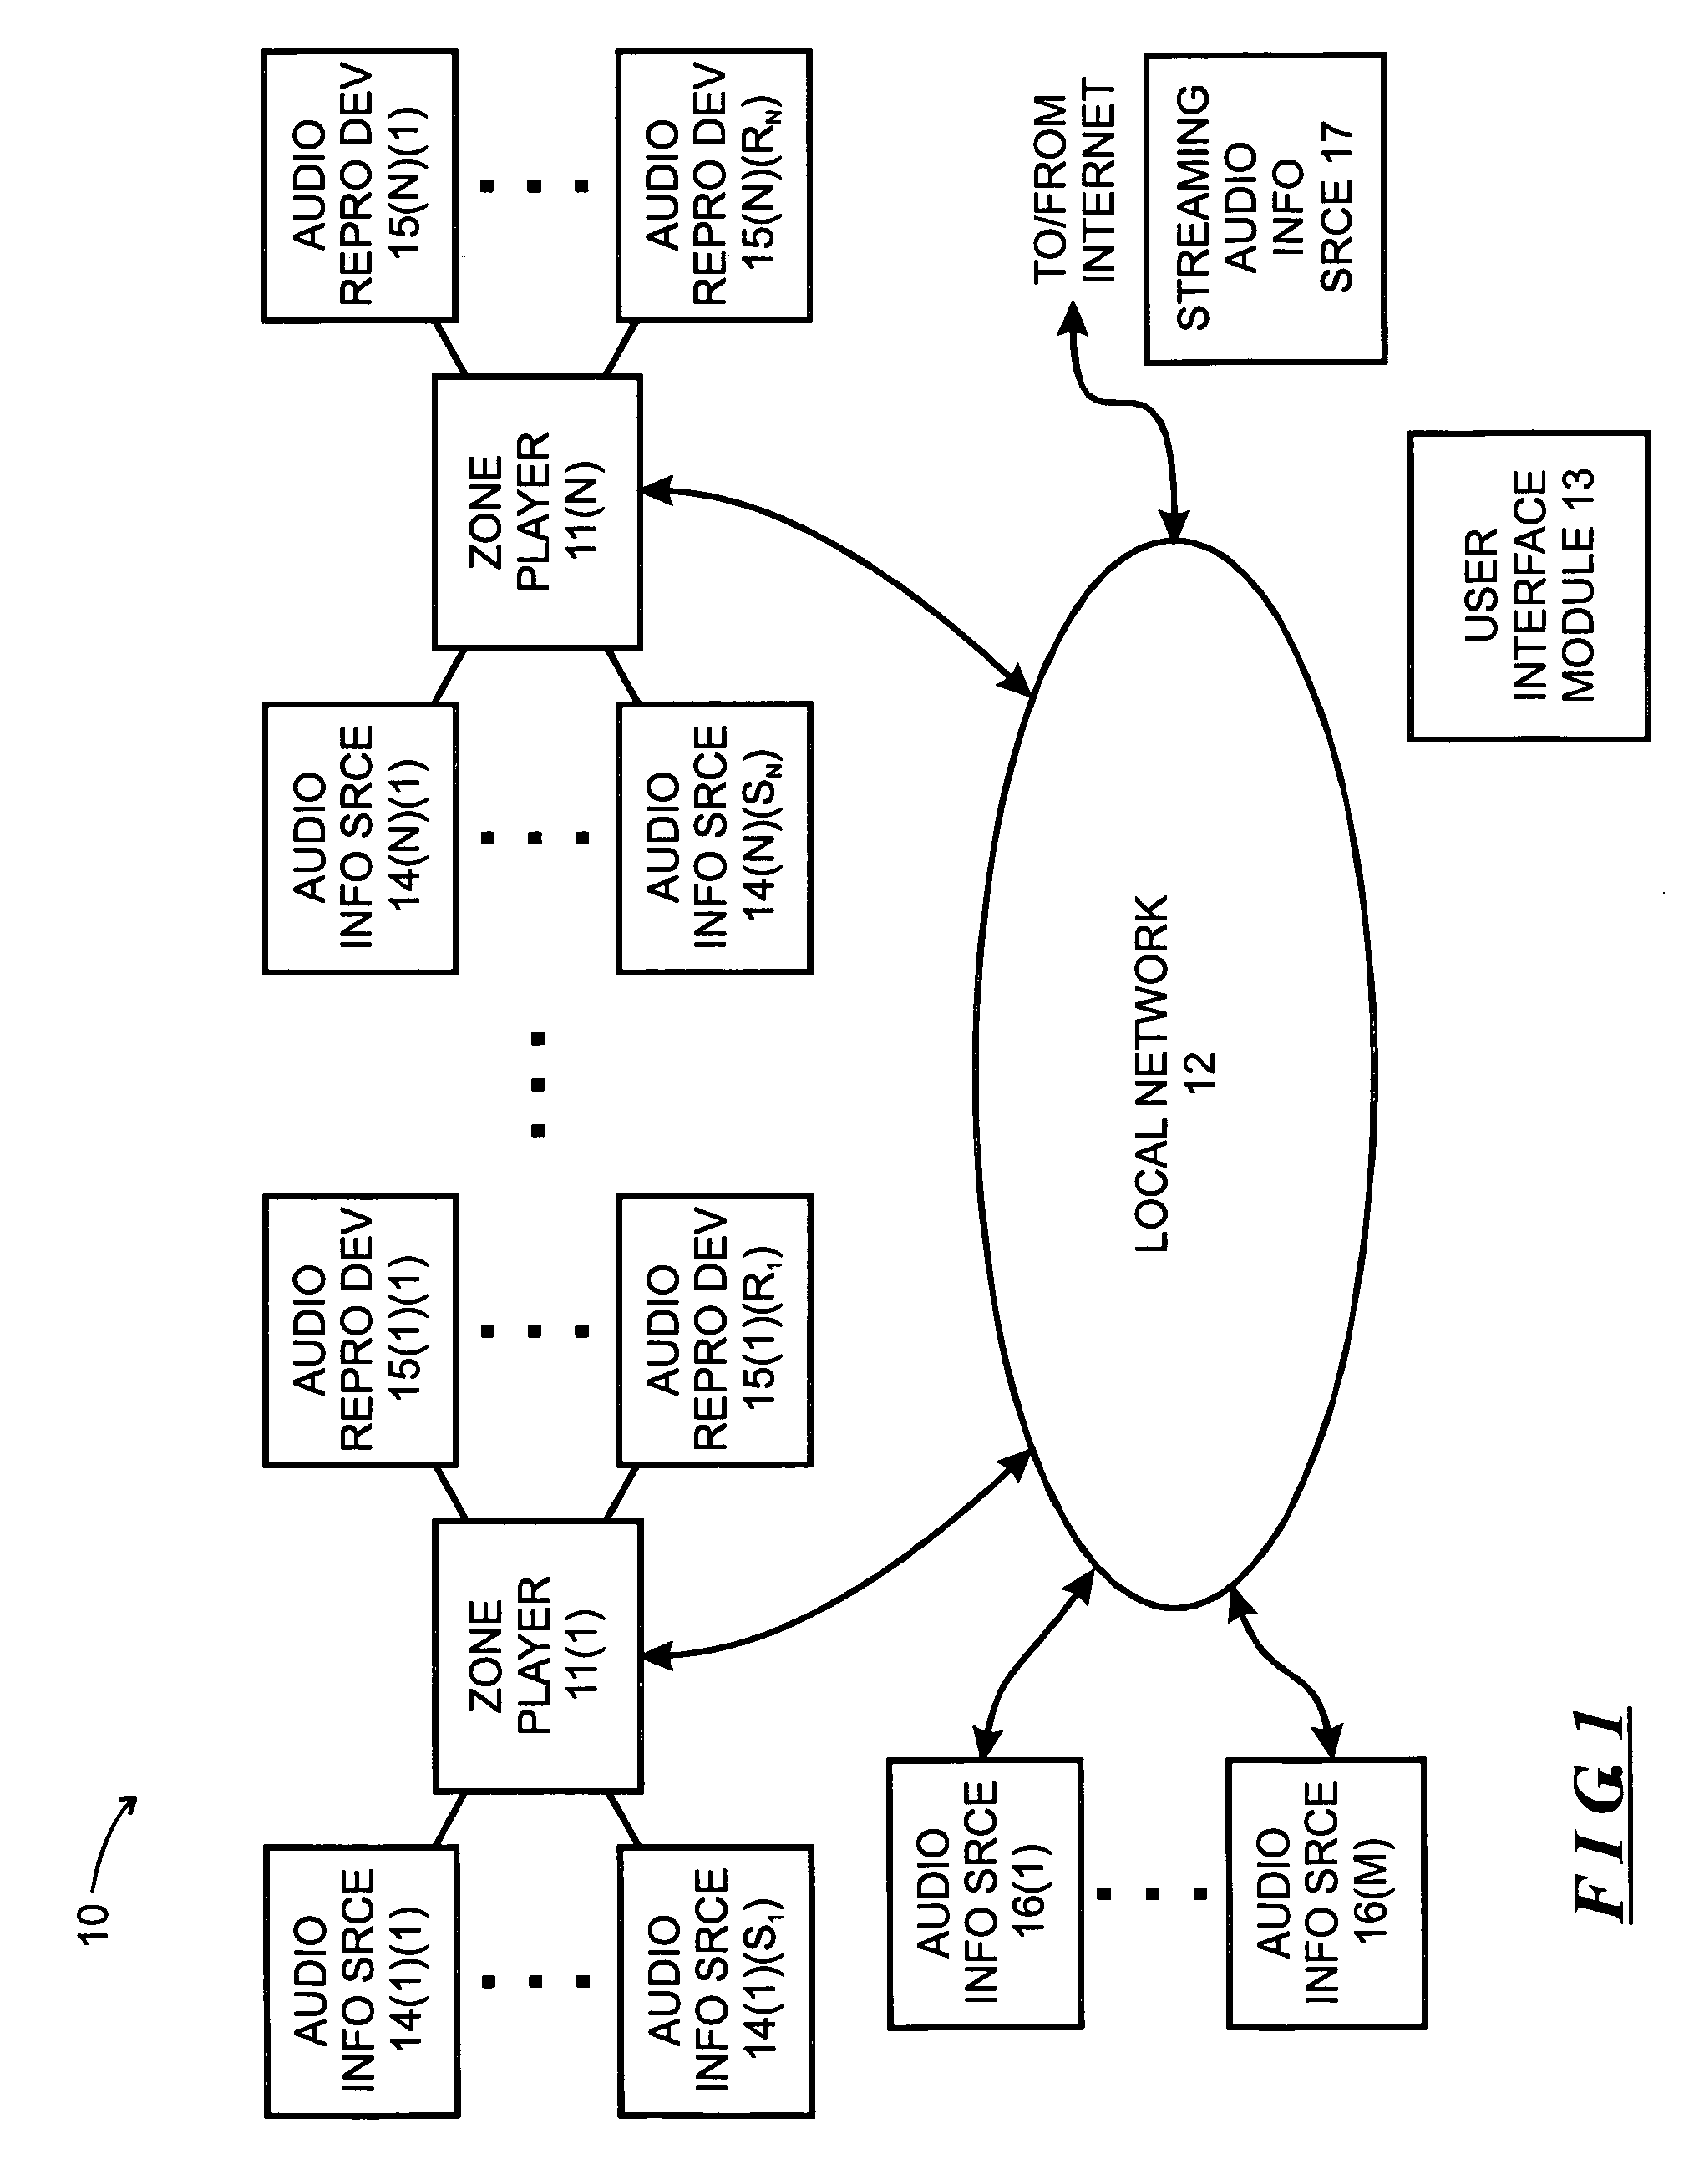 System and method for synchronizing channel handoff as among a plurality of devices